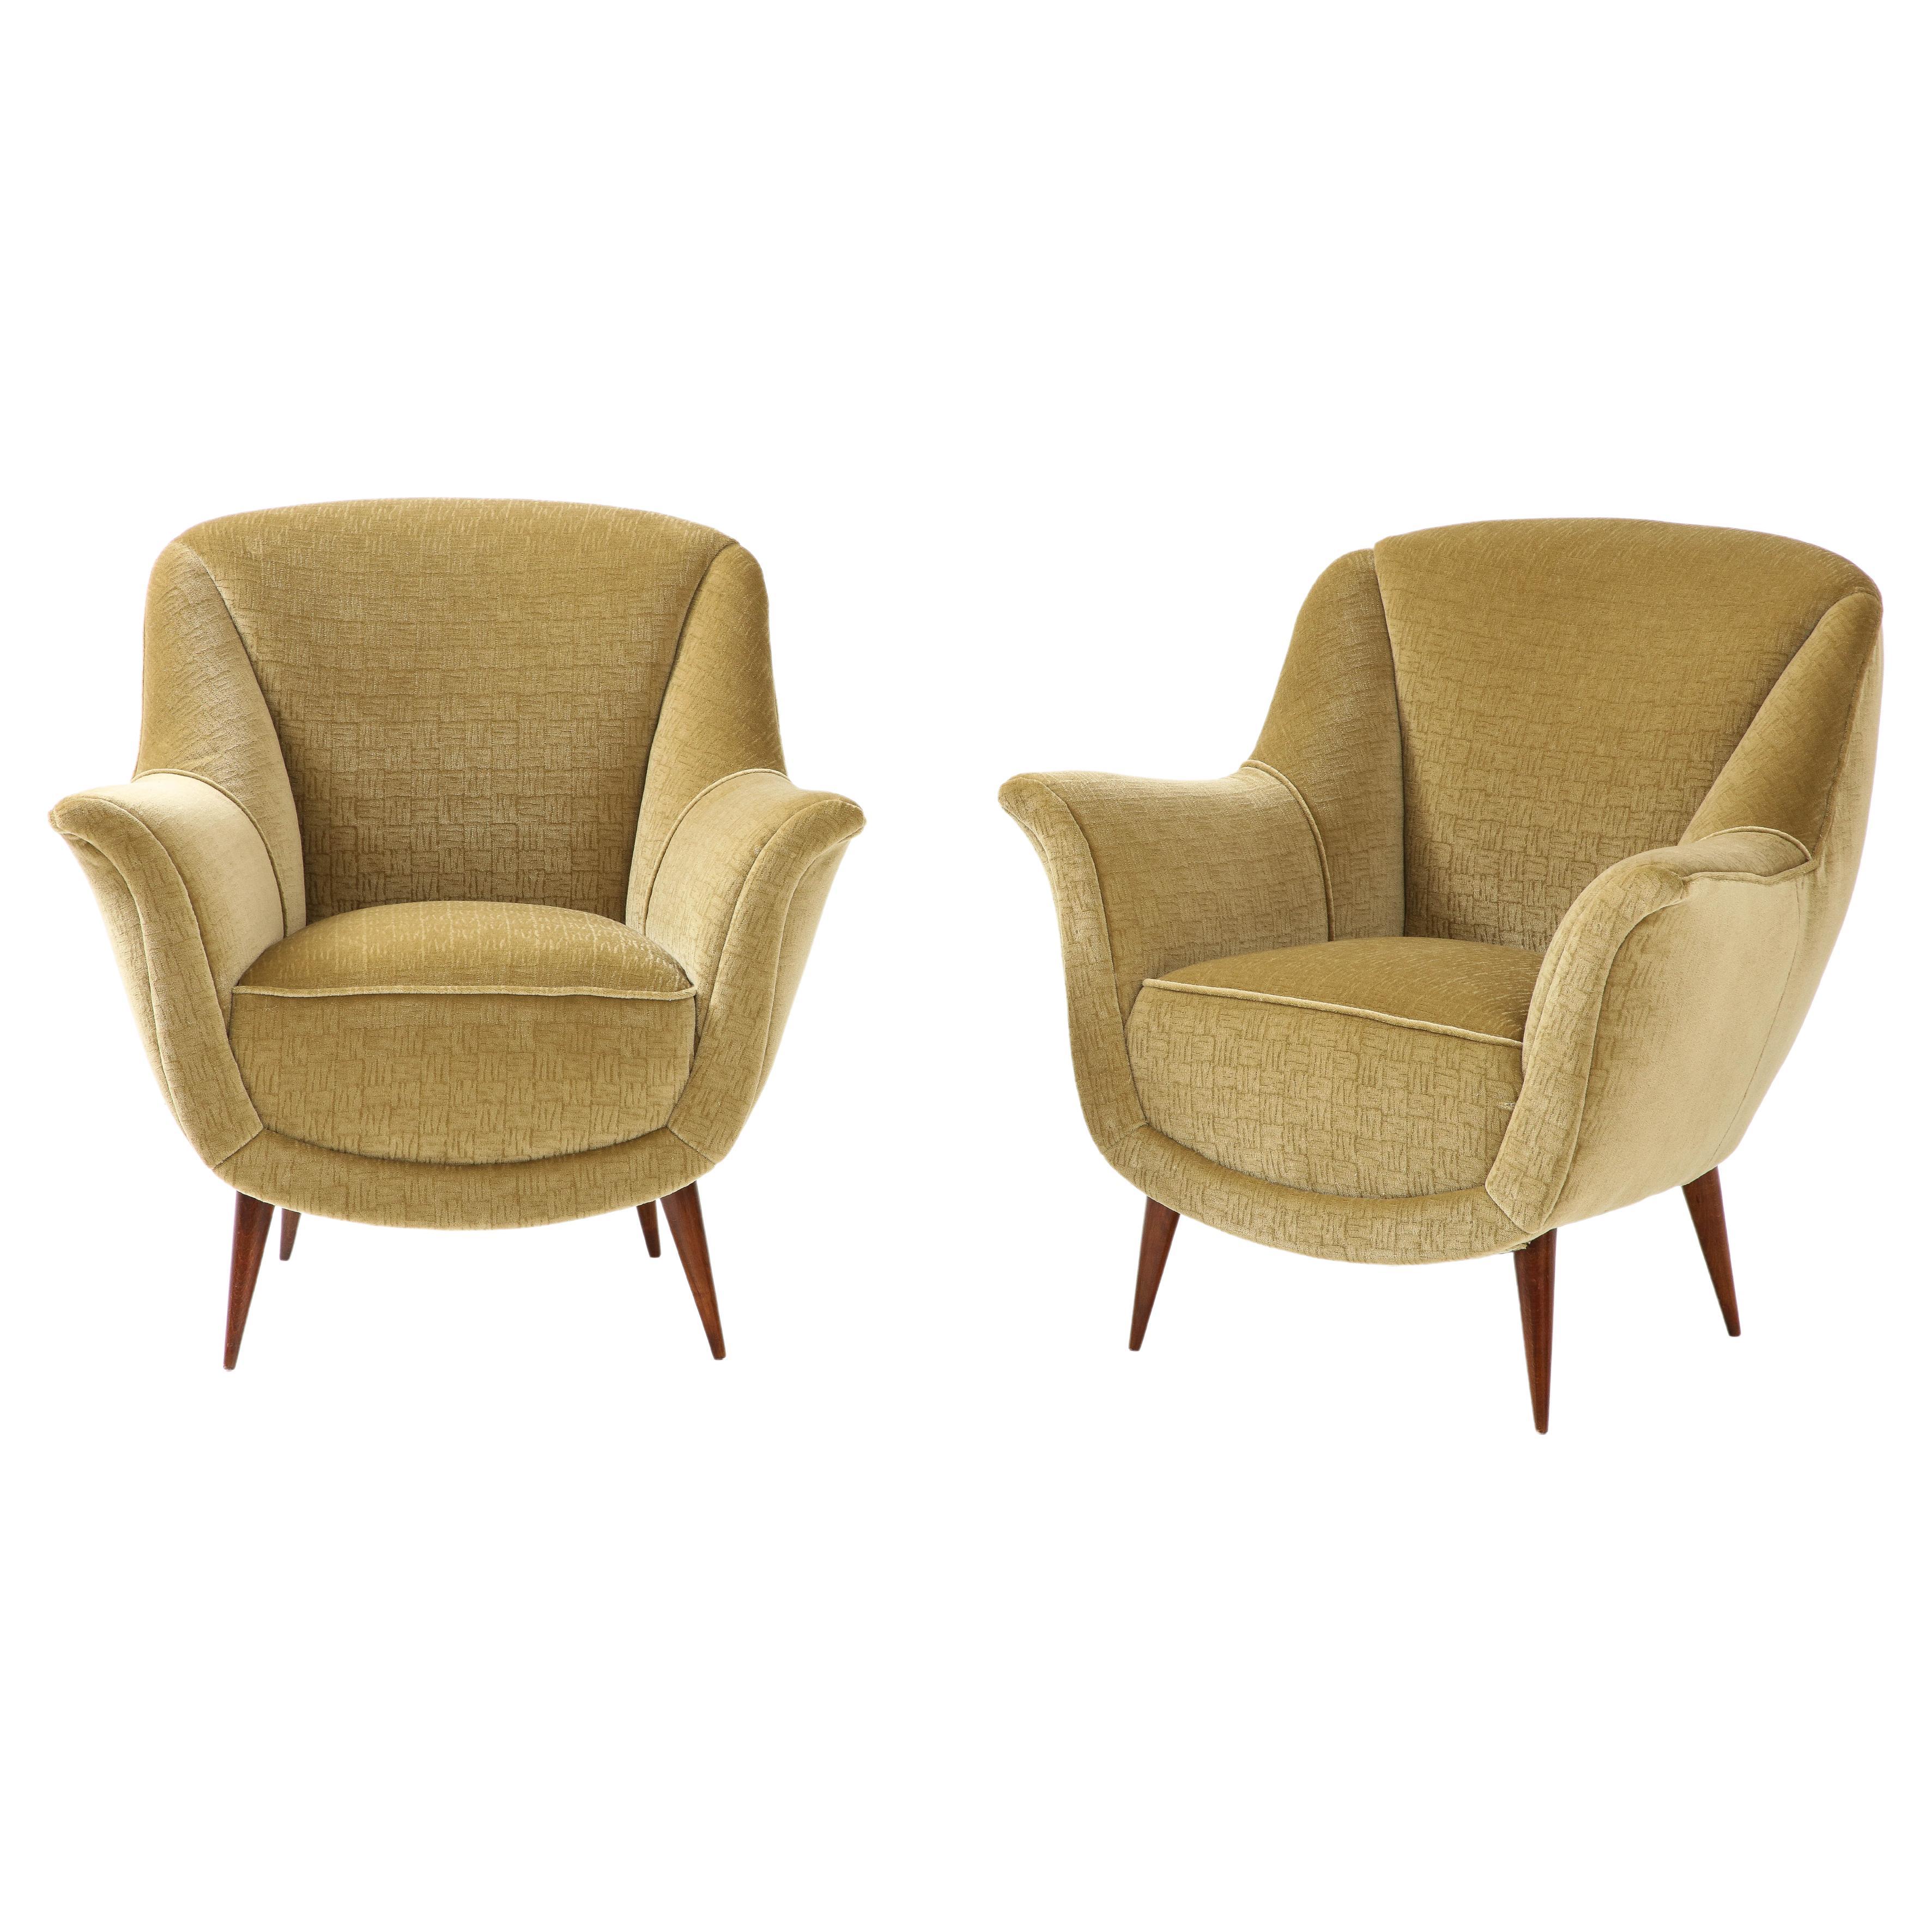 1950's Modernist Gio Ponti Style Italian Lounge Chairs In Mohair Upholstery For Sale